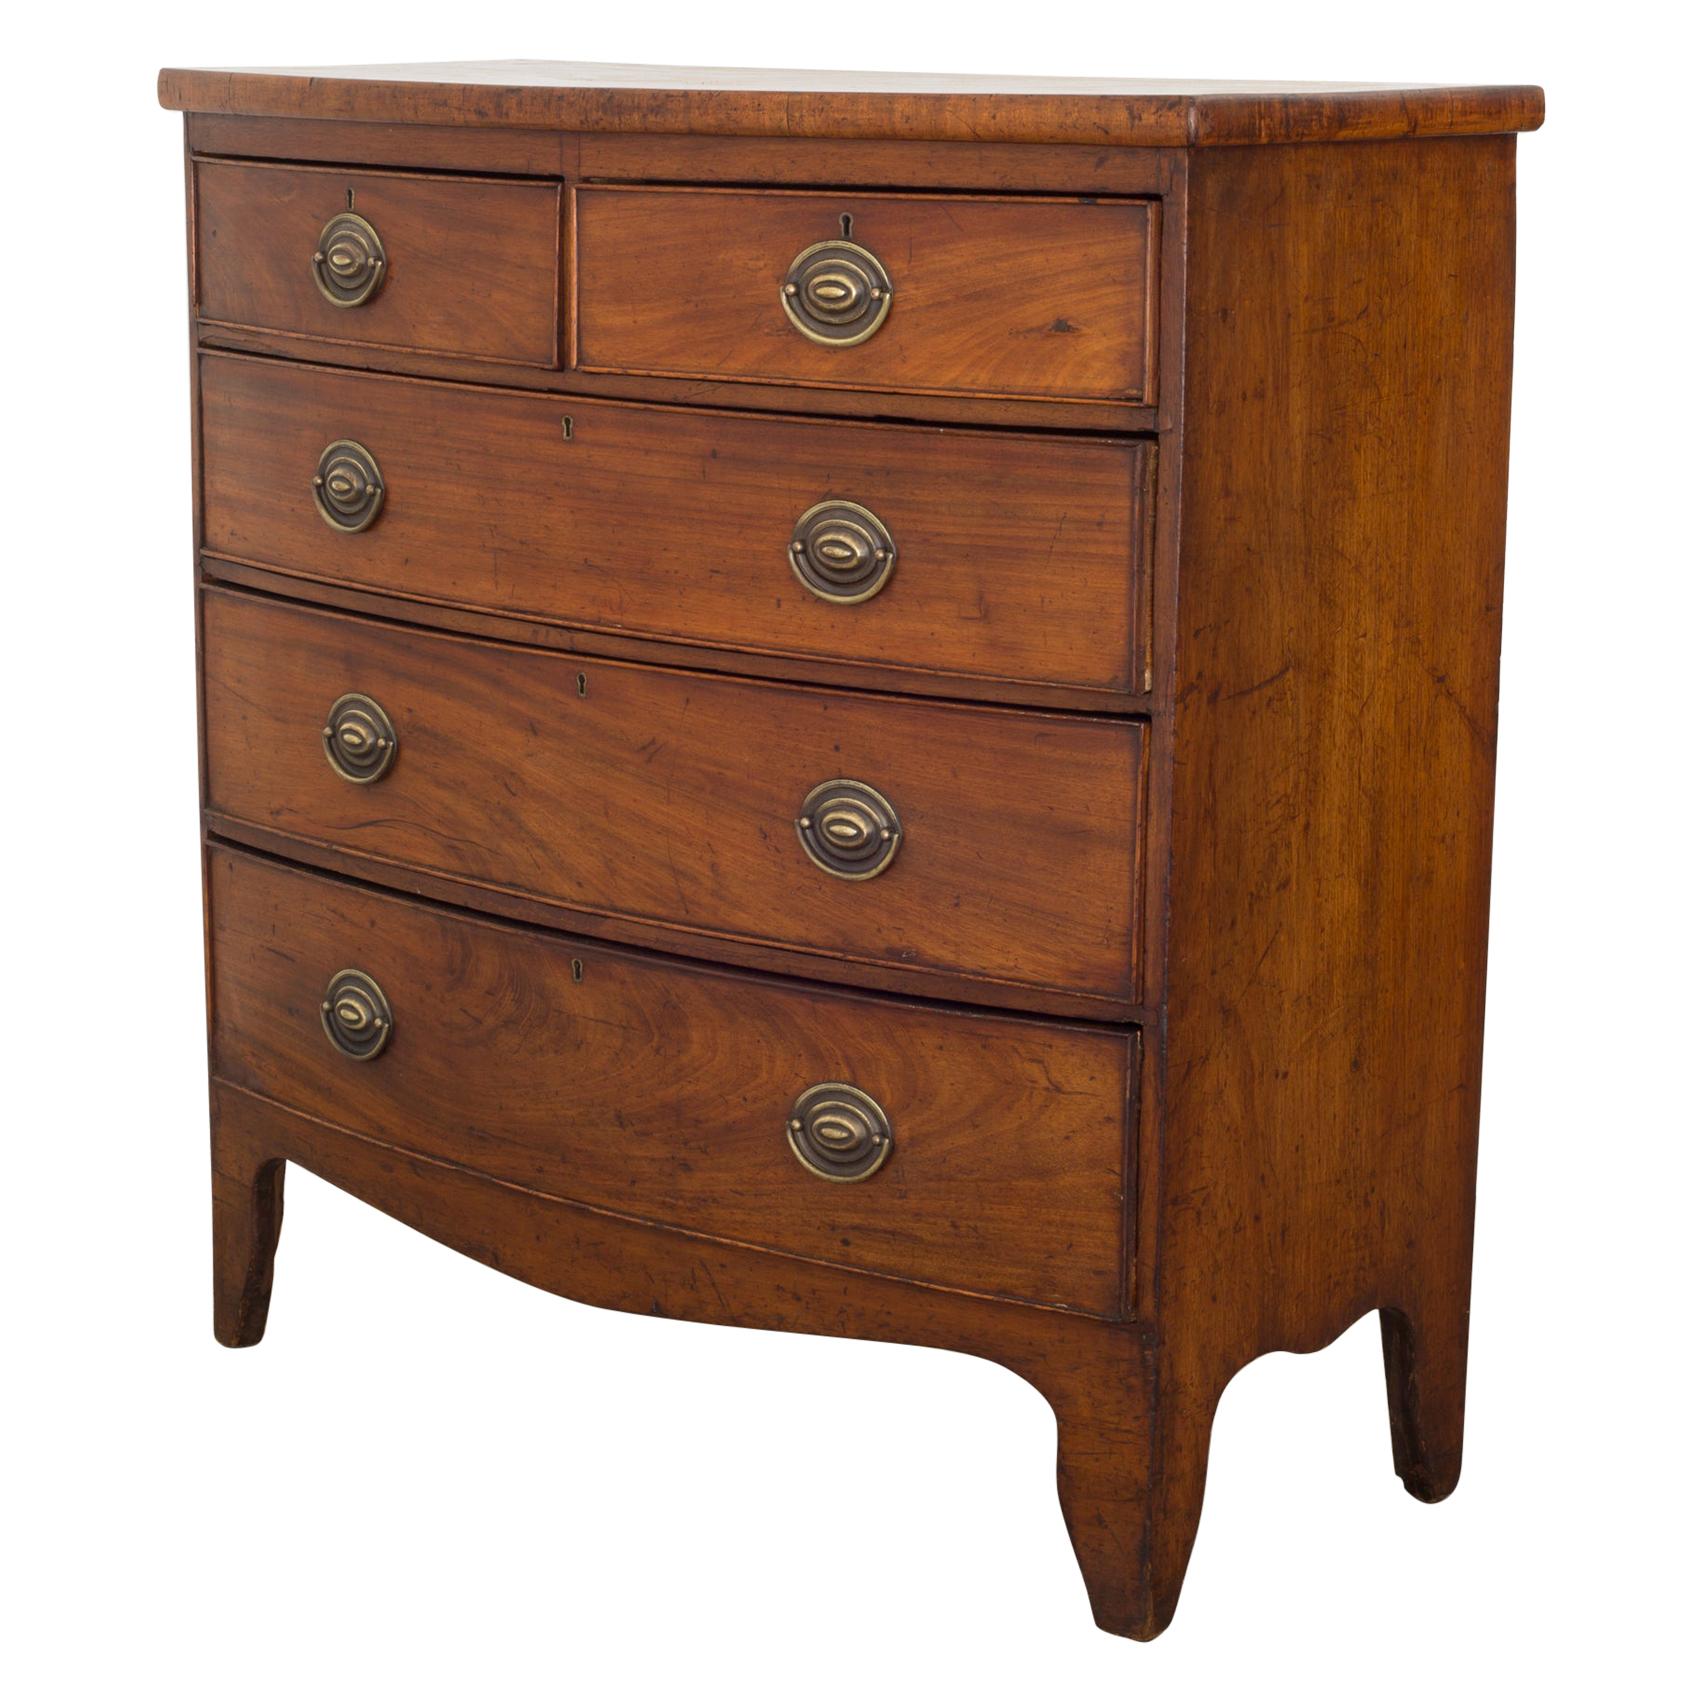 18th Century American Federal Mahogany Bow Front Chest, circa 1780